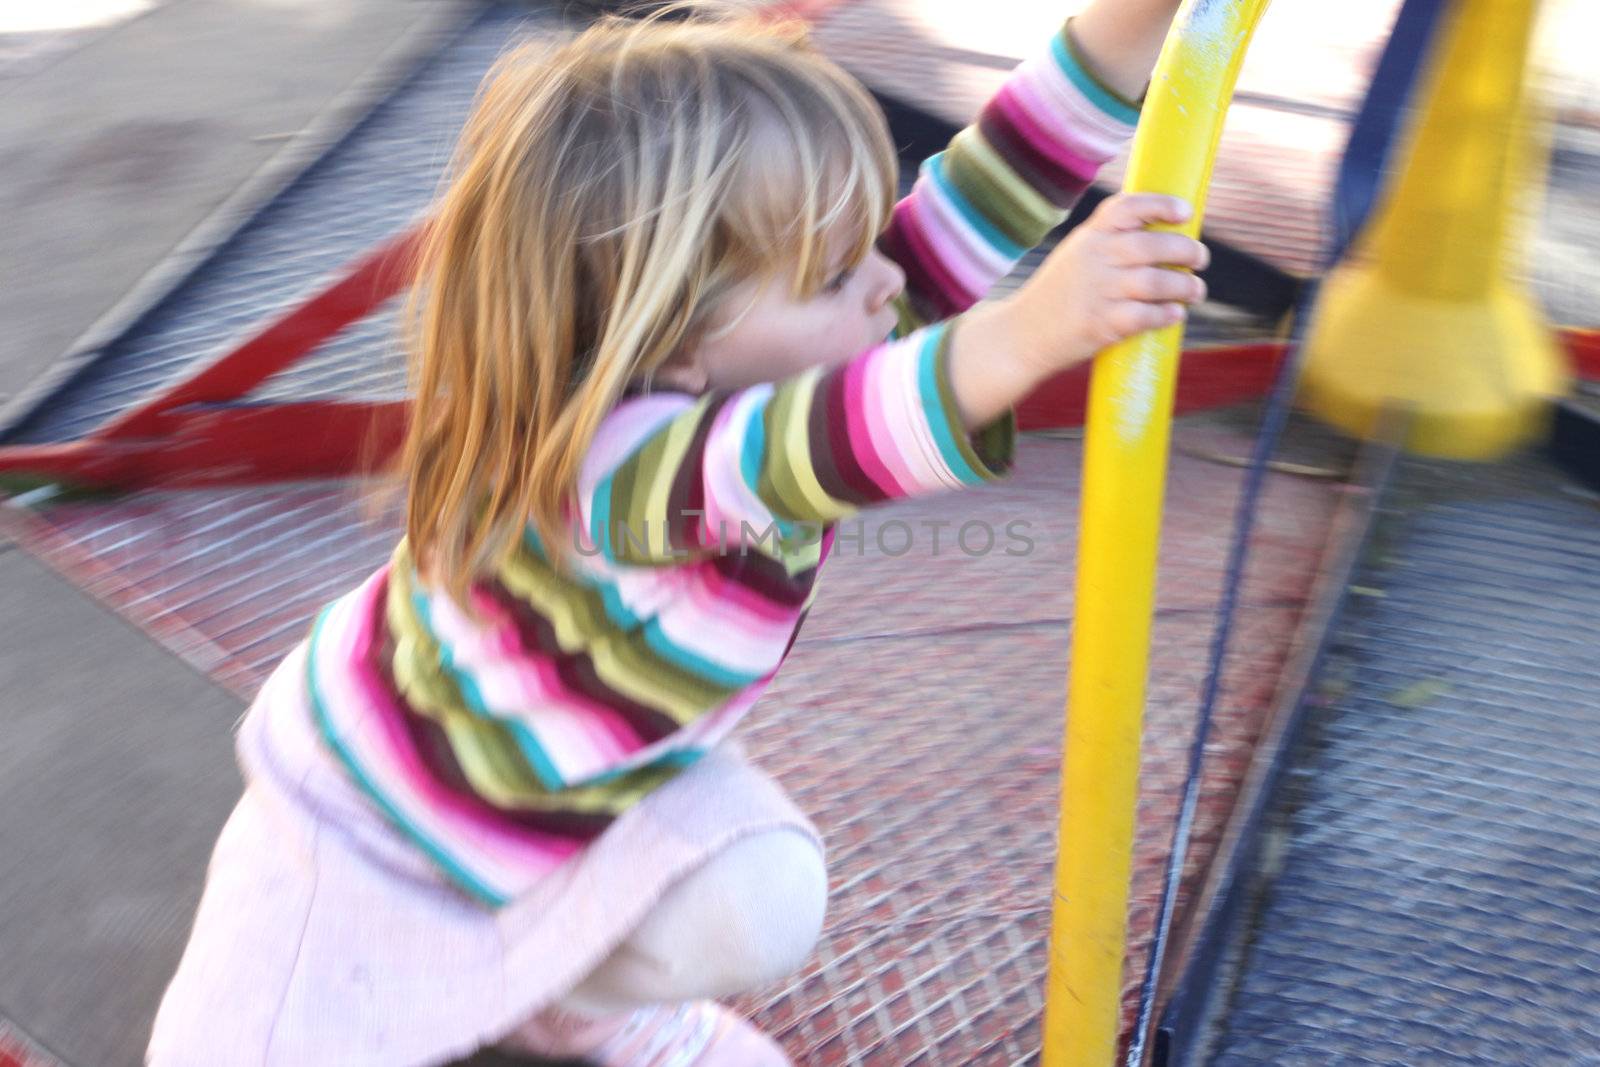 A girl on a merry go round. Motion blur







A girl pushing a merry go round